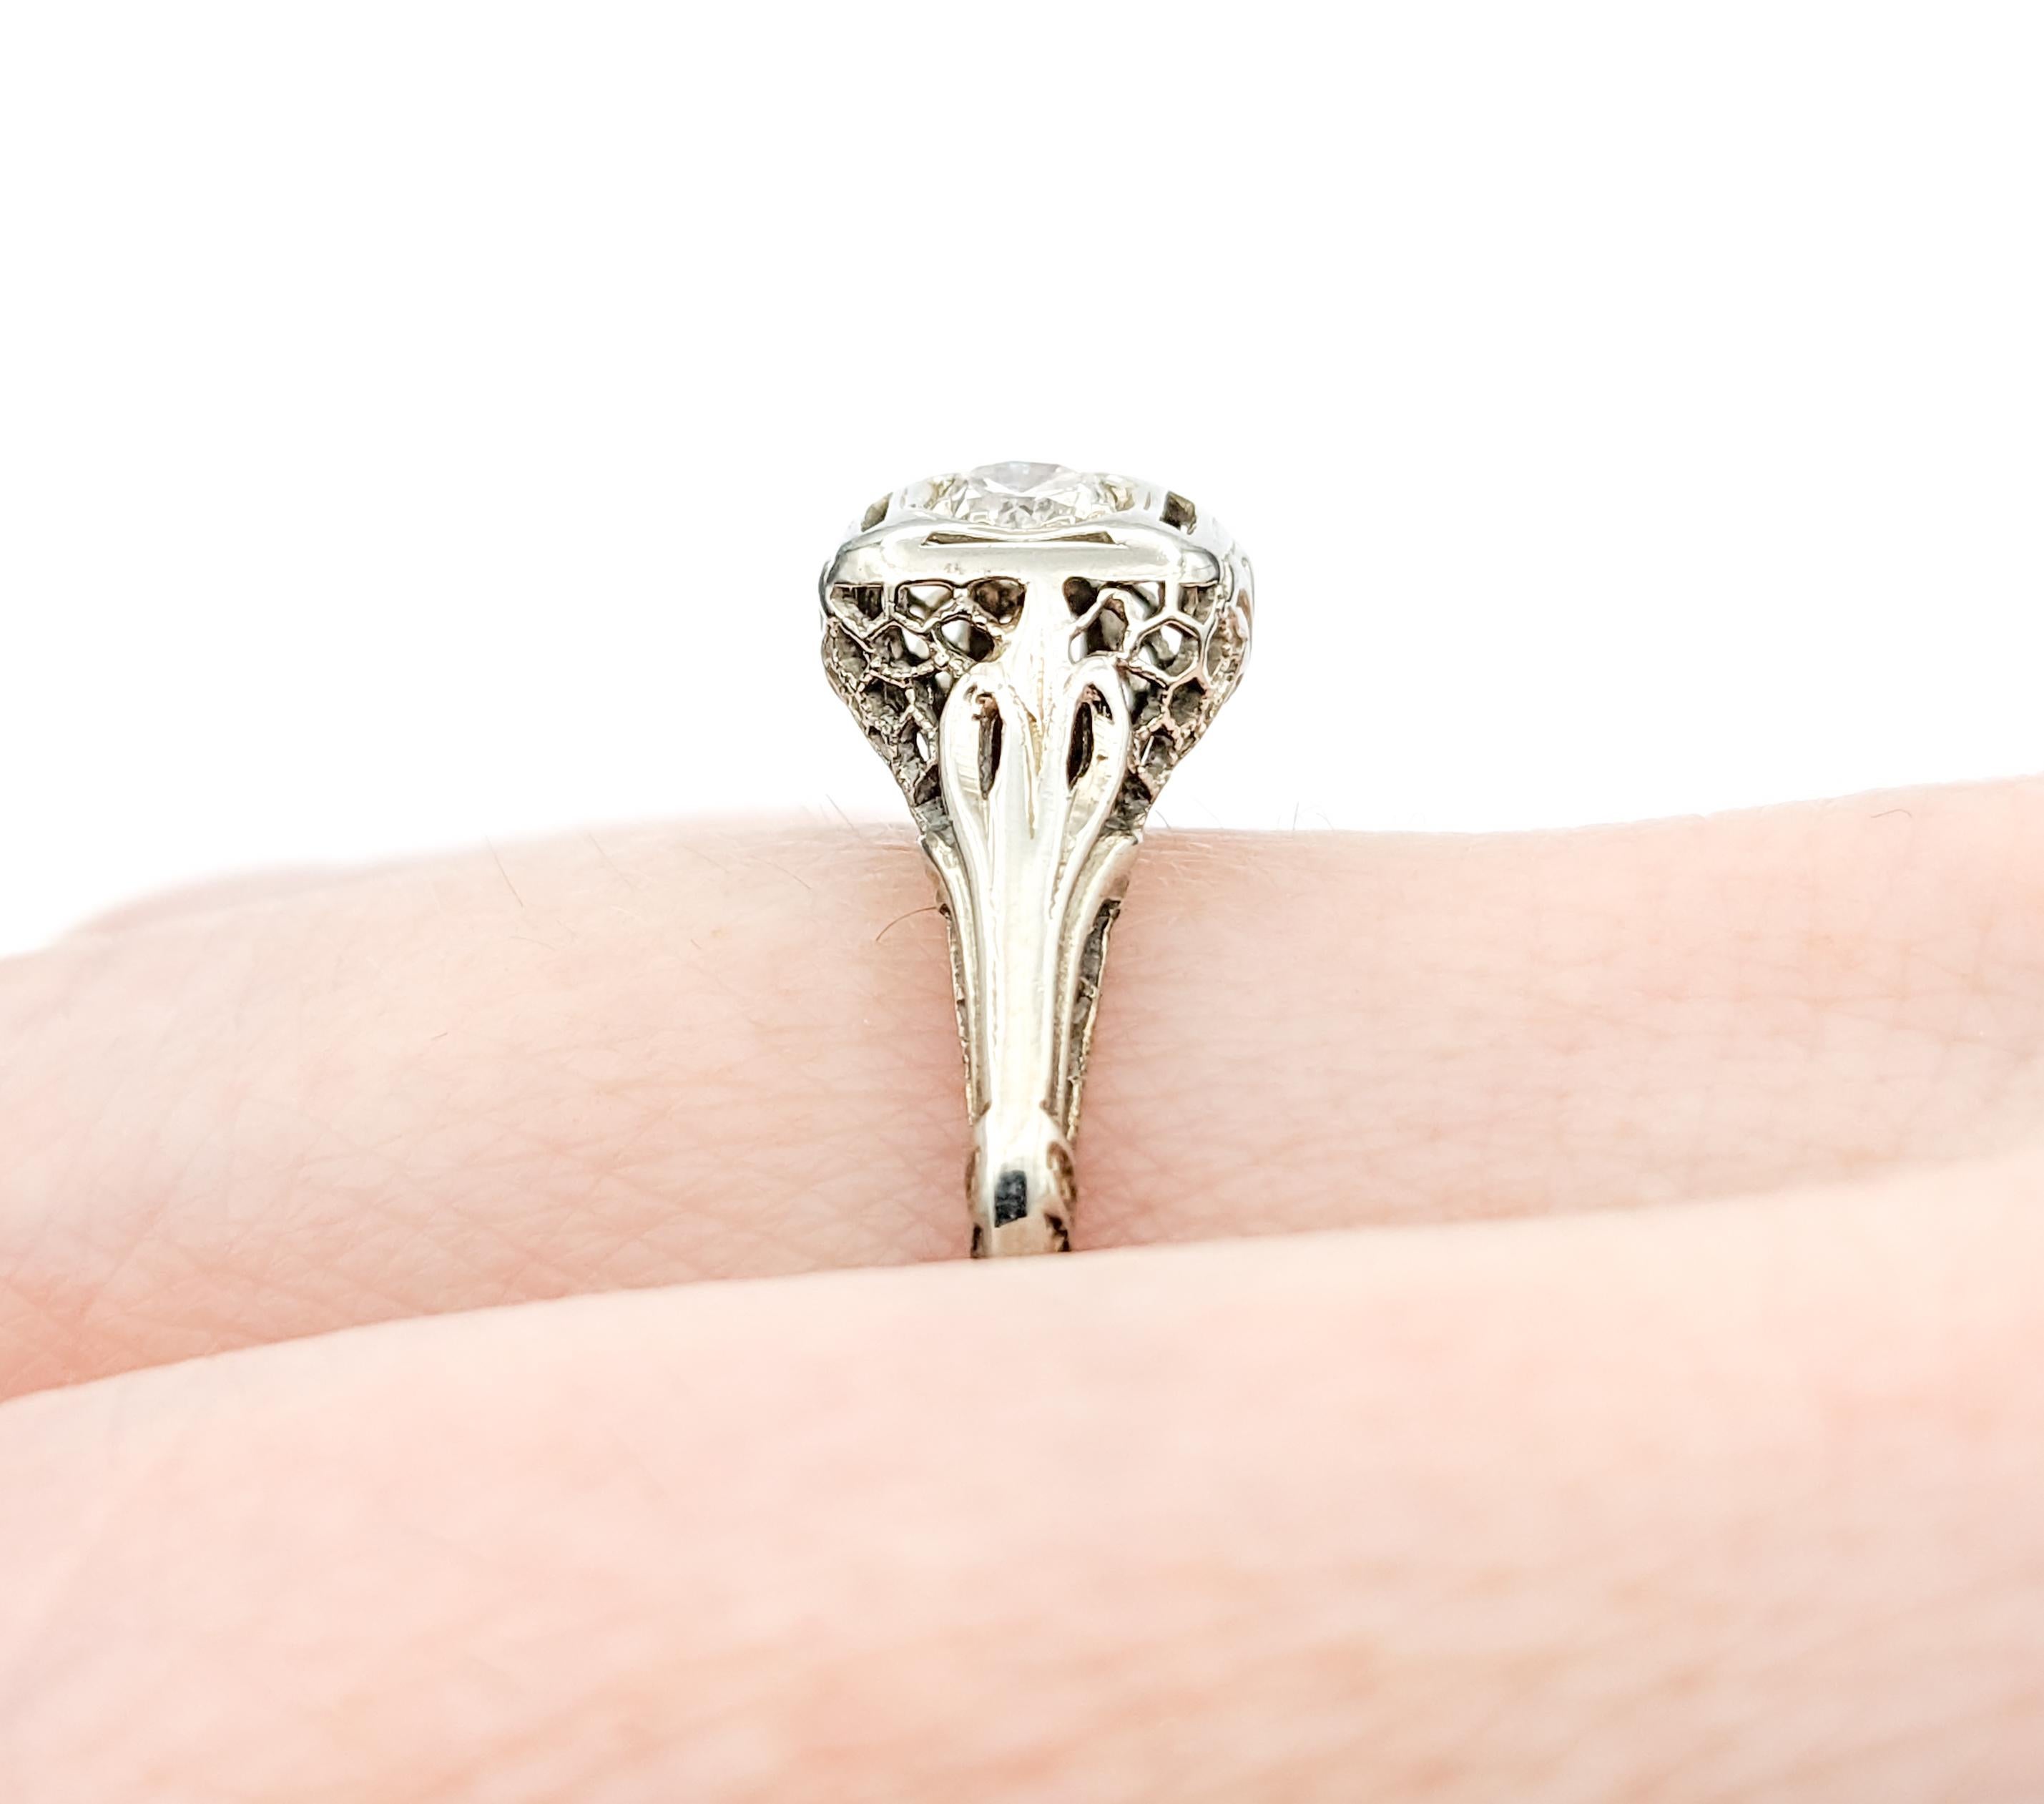 Diamond Art Deco Filigree Ring In White Gold In Excellent Condition For Sale In Bloomington, MN